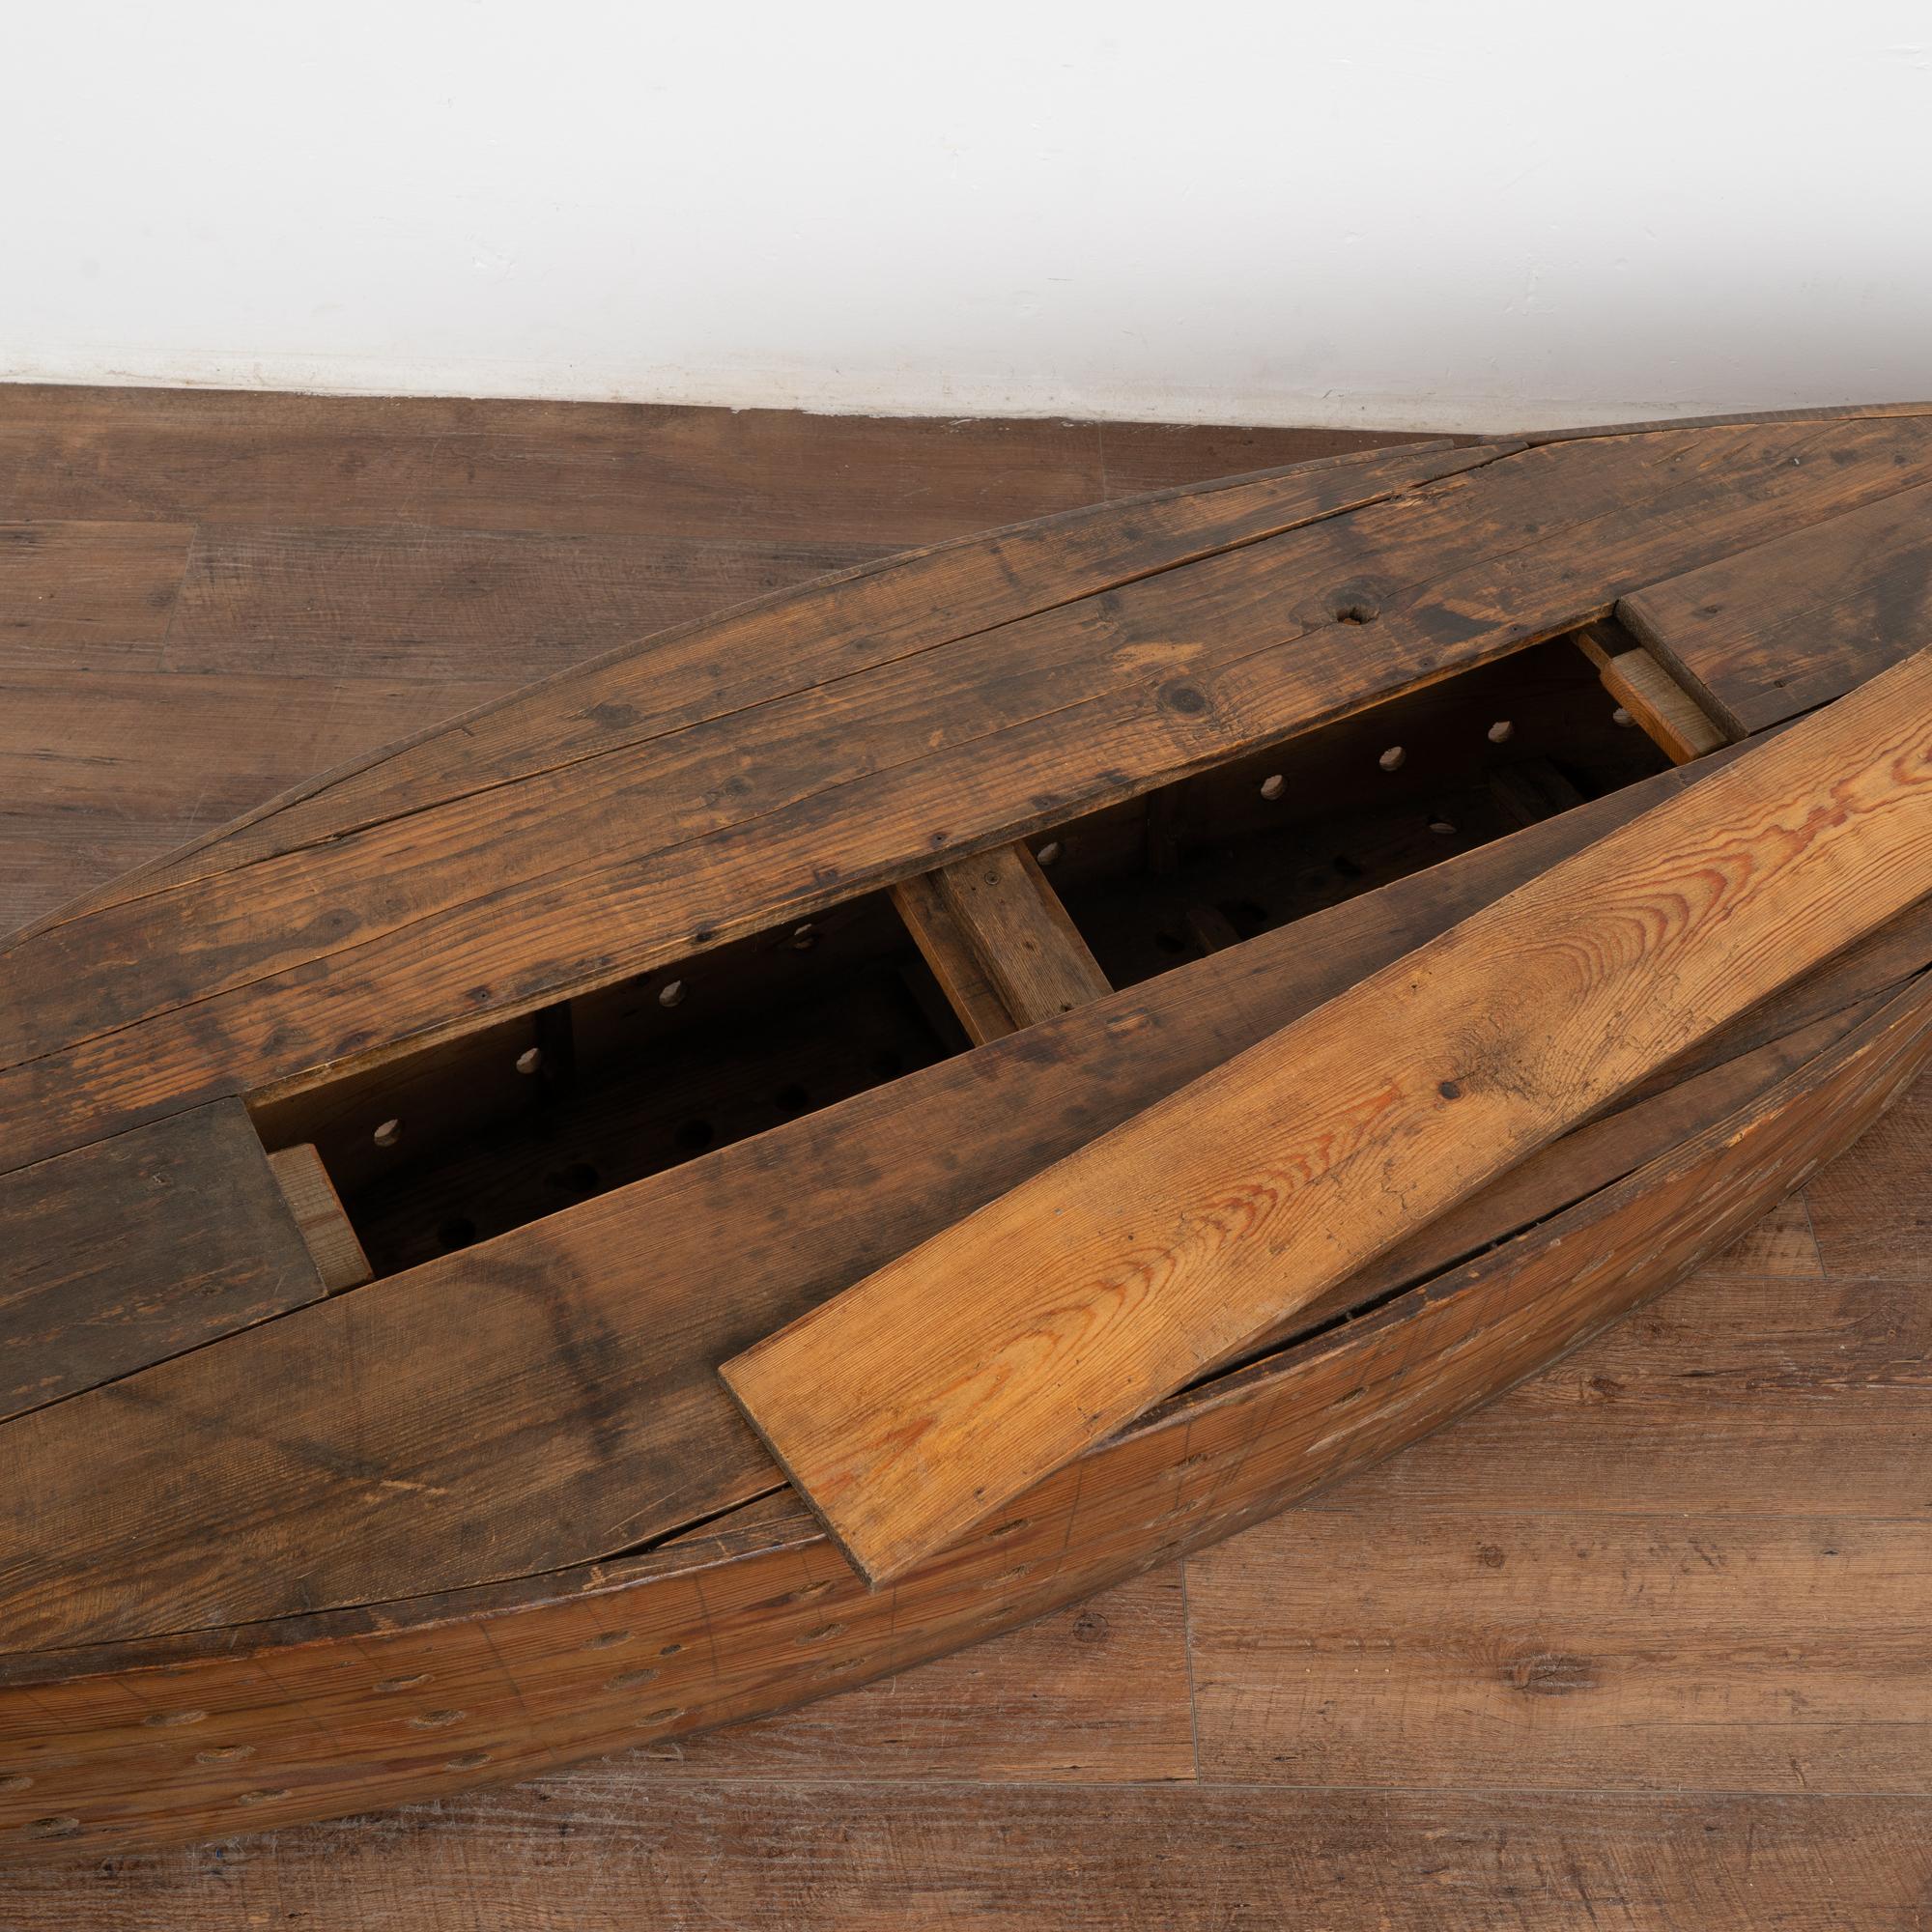 Rustic Decorative Model Boat With Holes For Fishing or Large Creel, circa 1940 For Sale 1